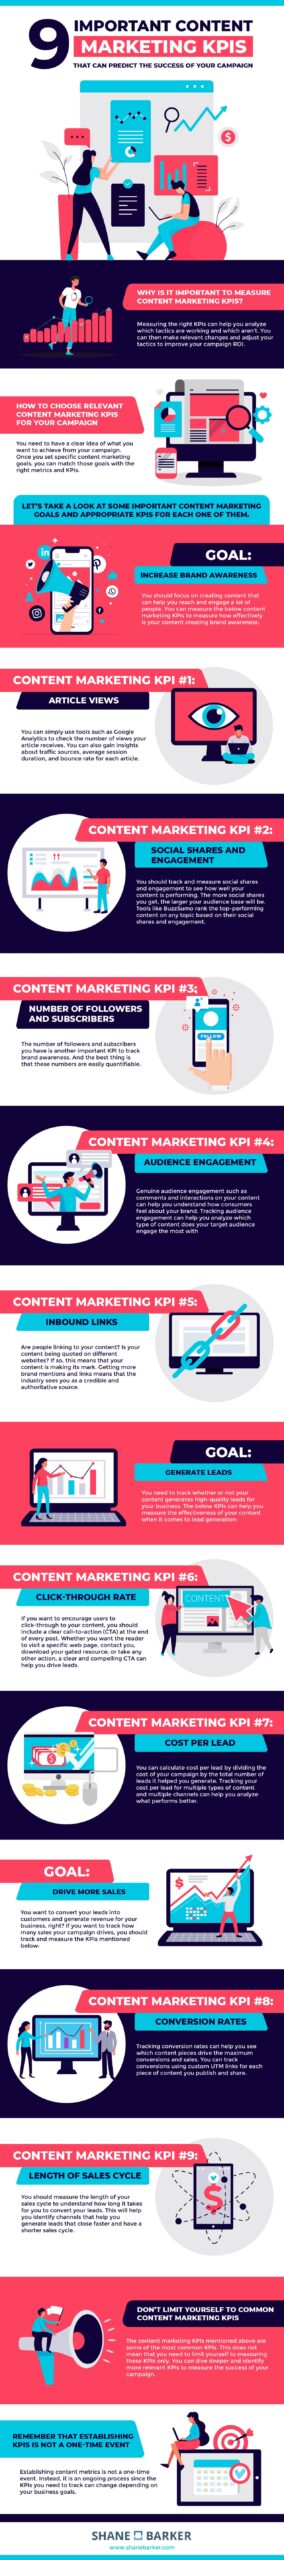 9-Important-Content-Marketing-KPIs-That-Can-Predict-the-Success-of-Your-CampaignInfographic